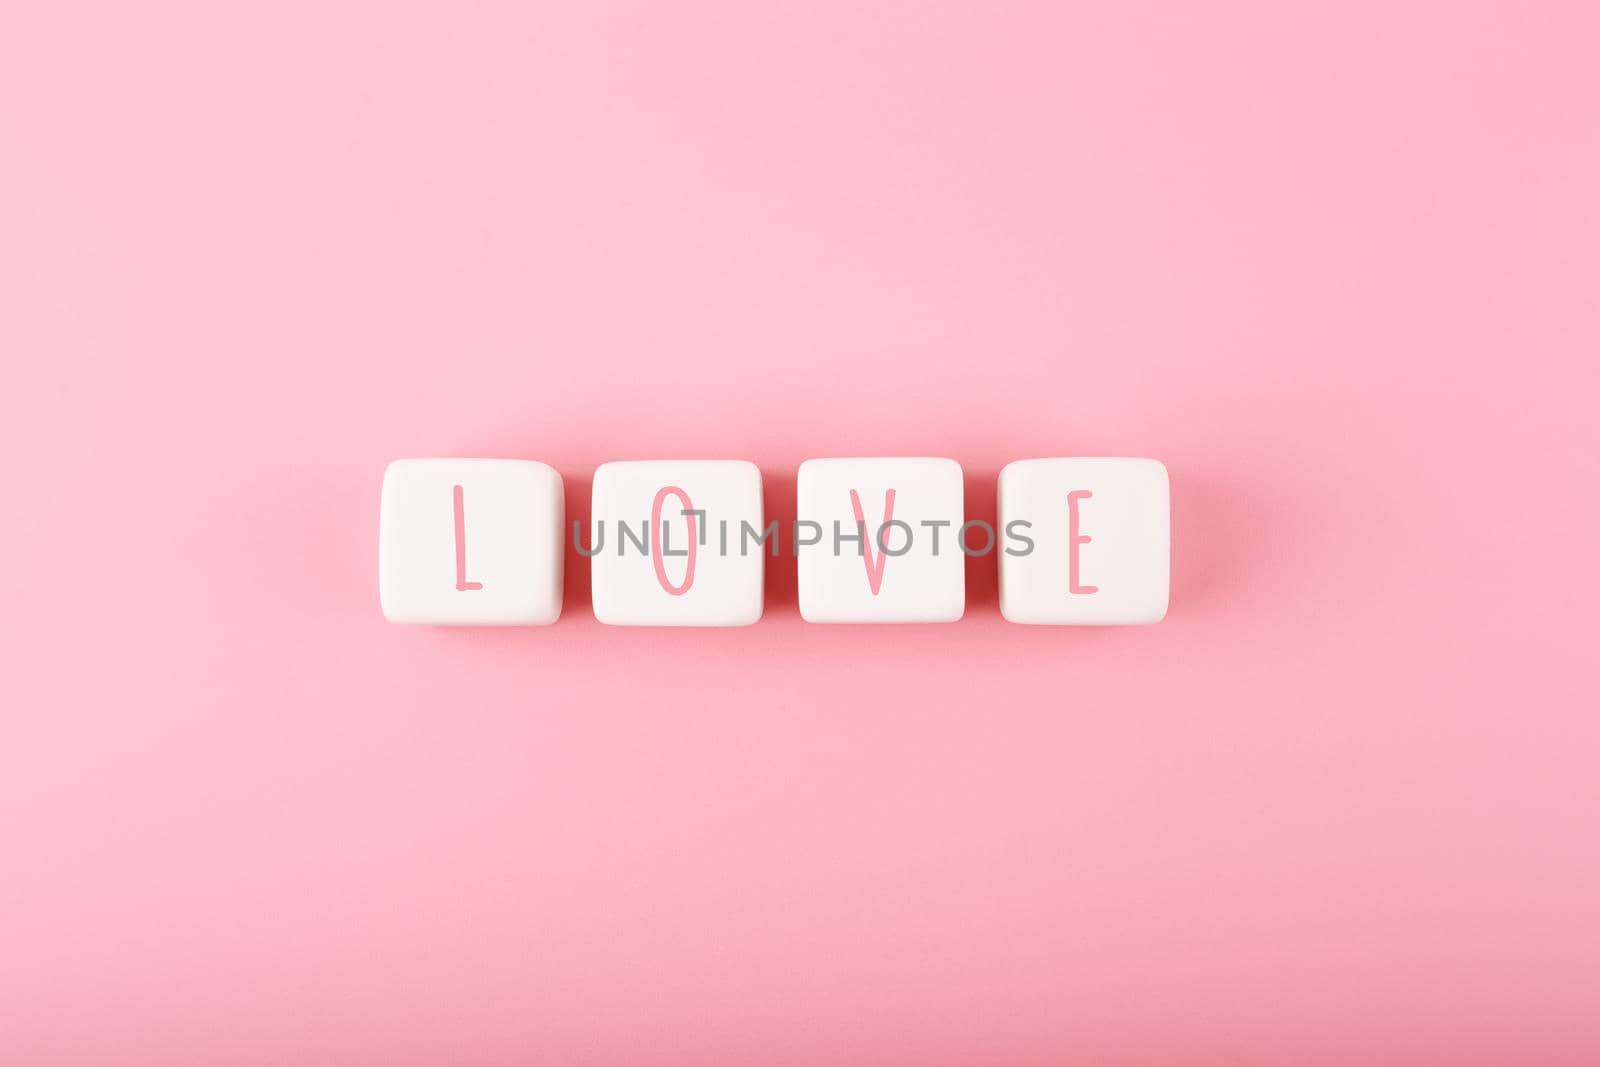 Word love written on white toy cubes against pink background with copy space. Minimal trendy concept of Valentine's day, love emotions, anniversary or dating